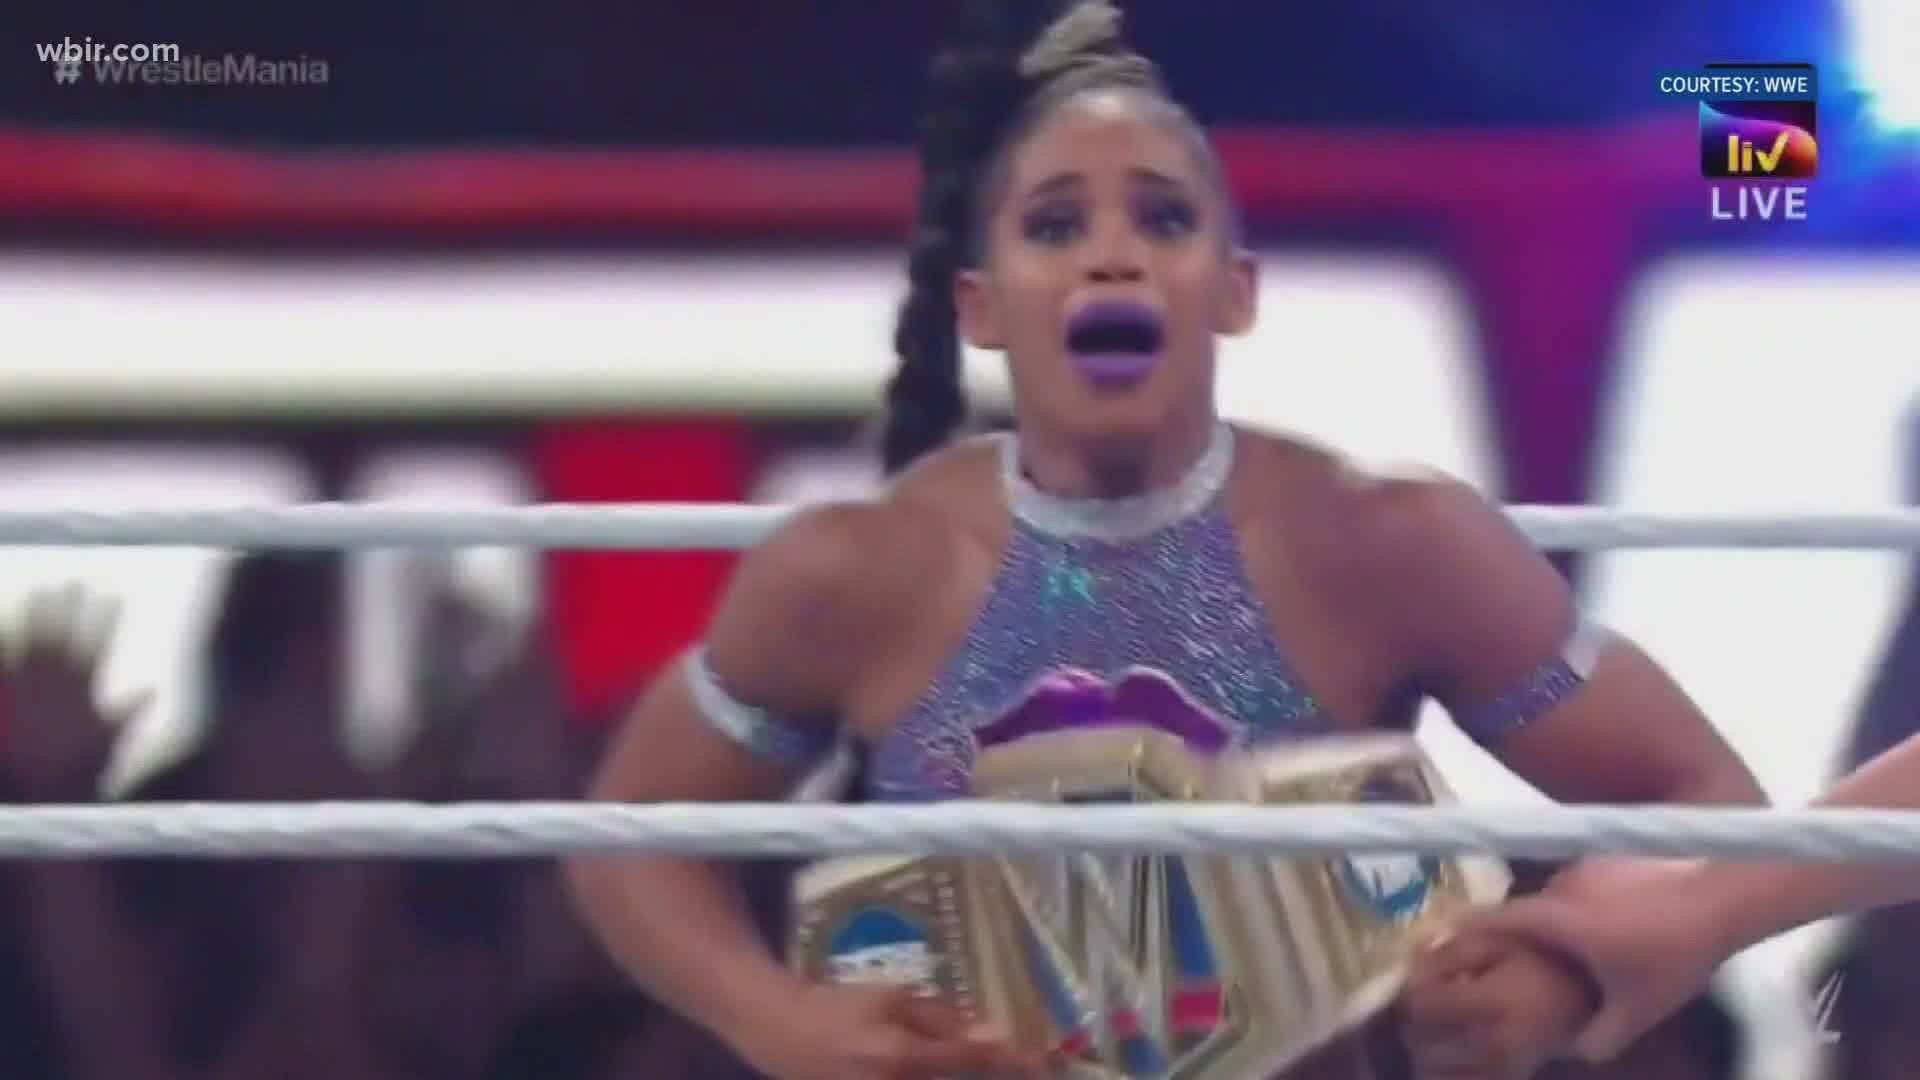 The current Smackdown Women's Champion has two of the four nominations for best WWE moment.